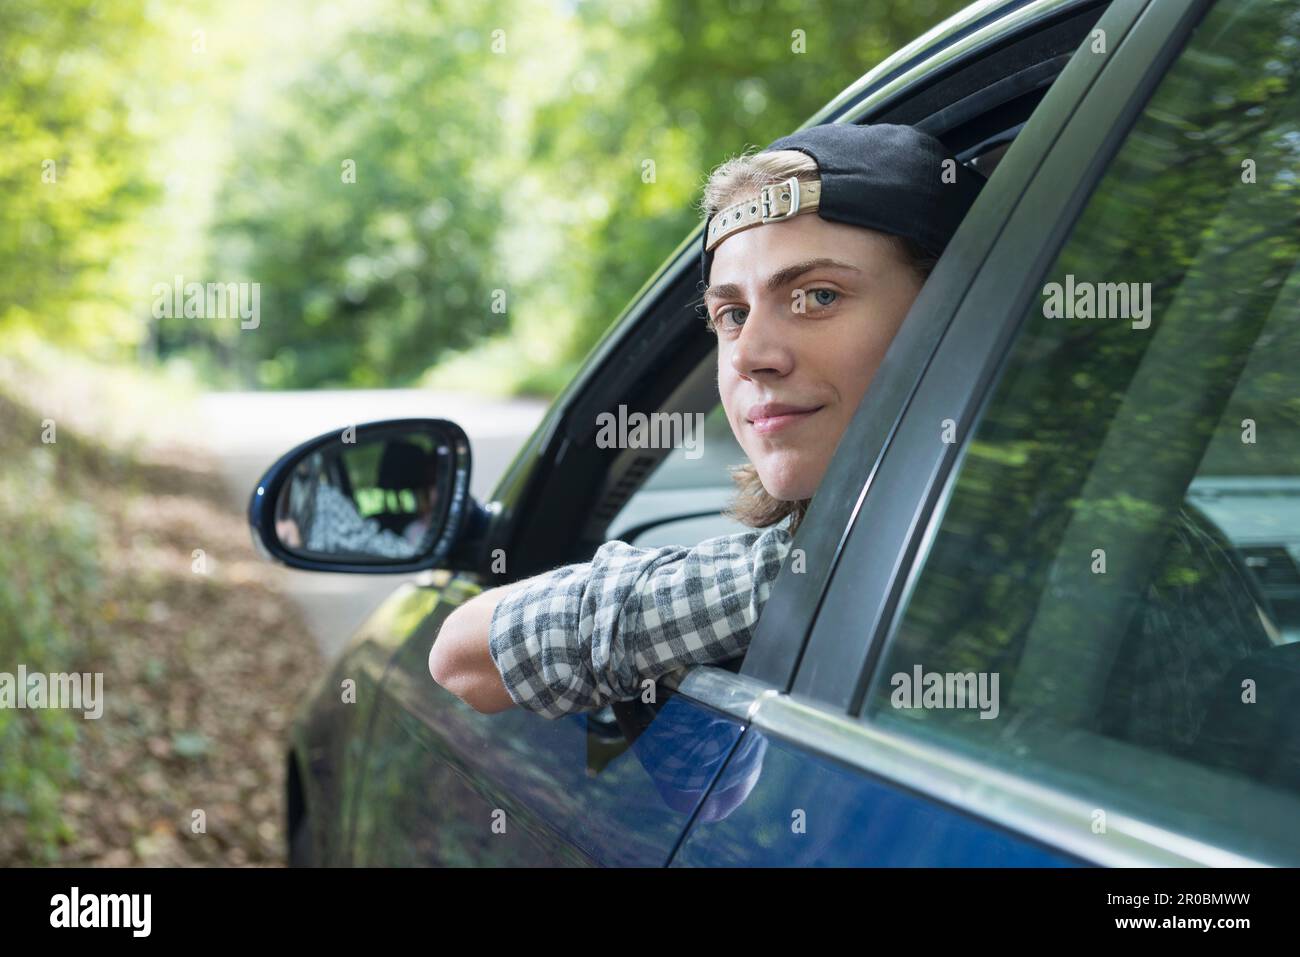 Teenage boy looking out of car window, Bavaria, Germany Stock Photo